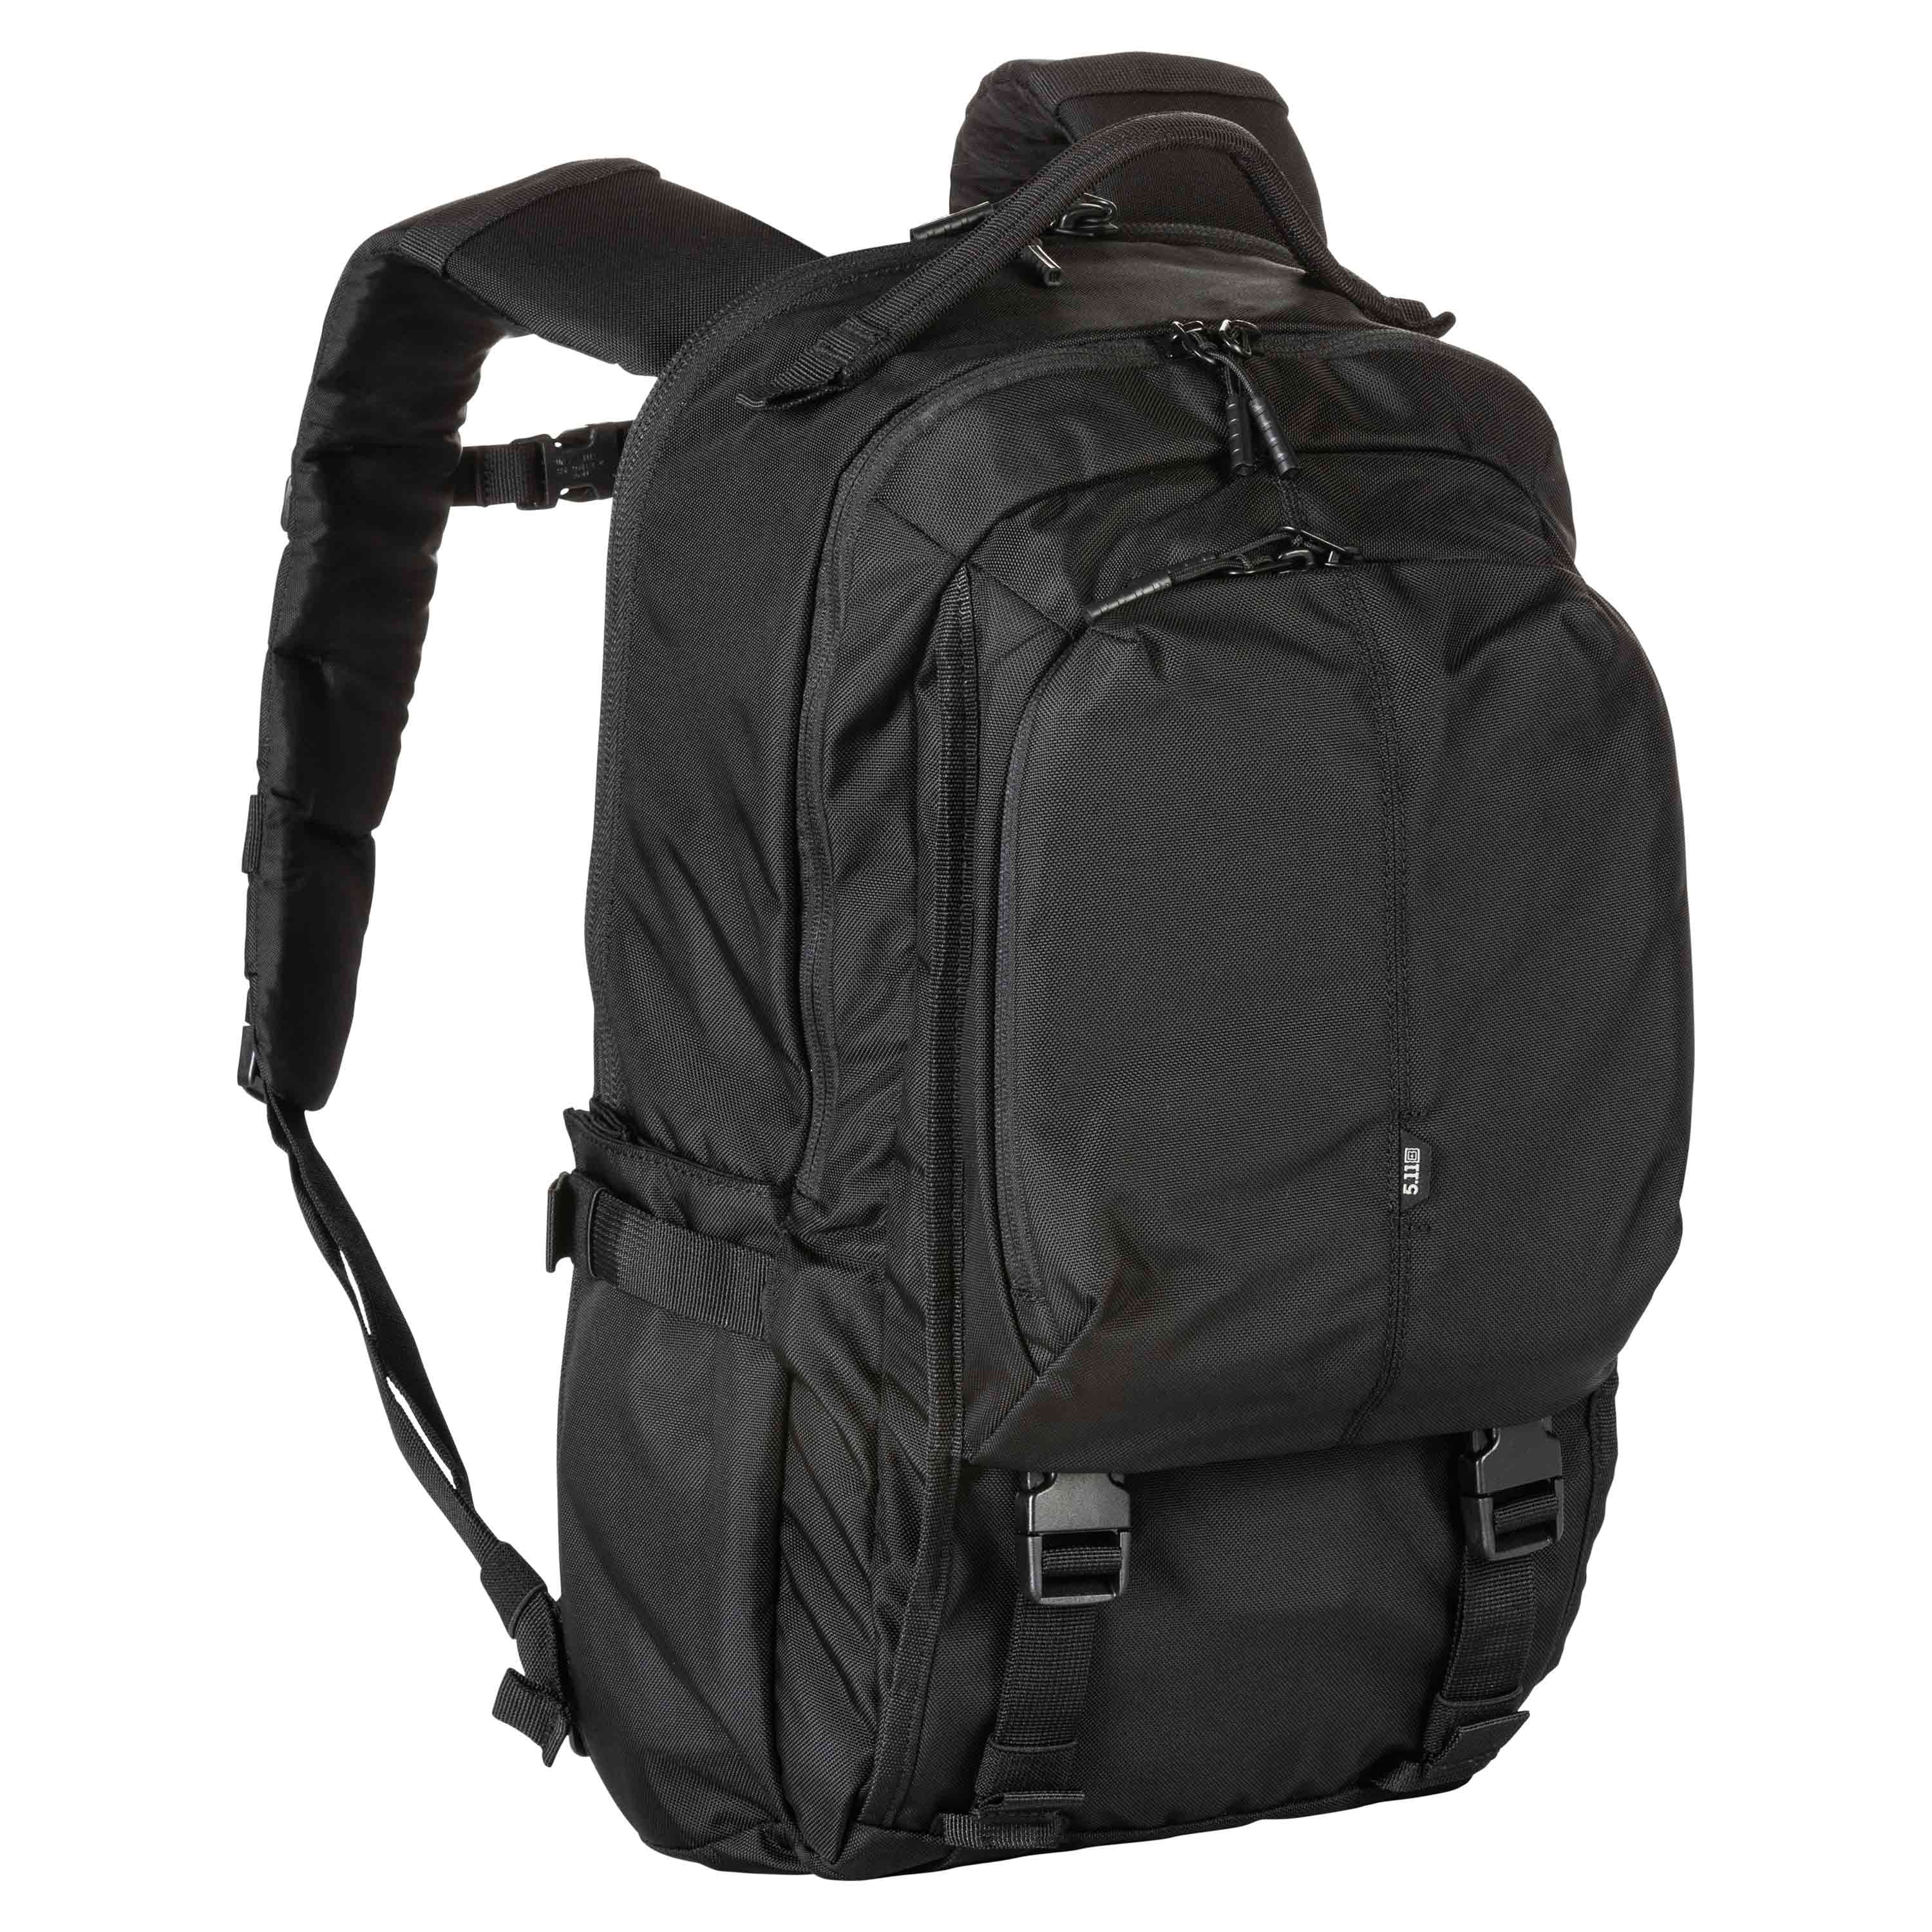 Purchase the 5.11 Rifle Backpack LV M4 black by ASMC